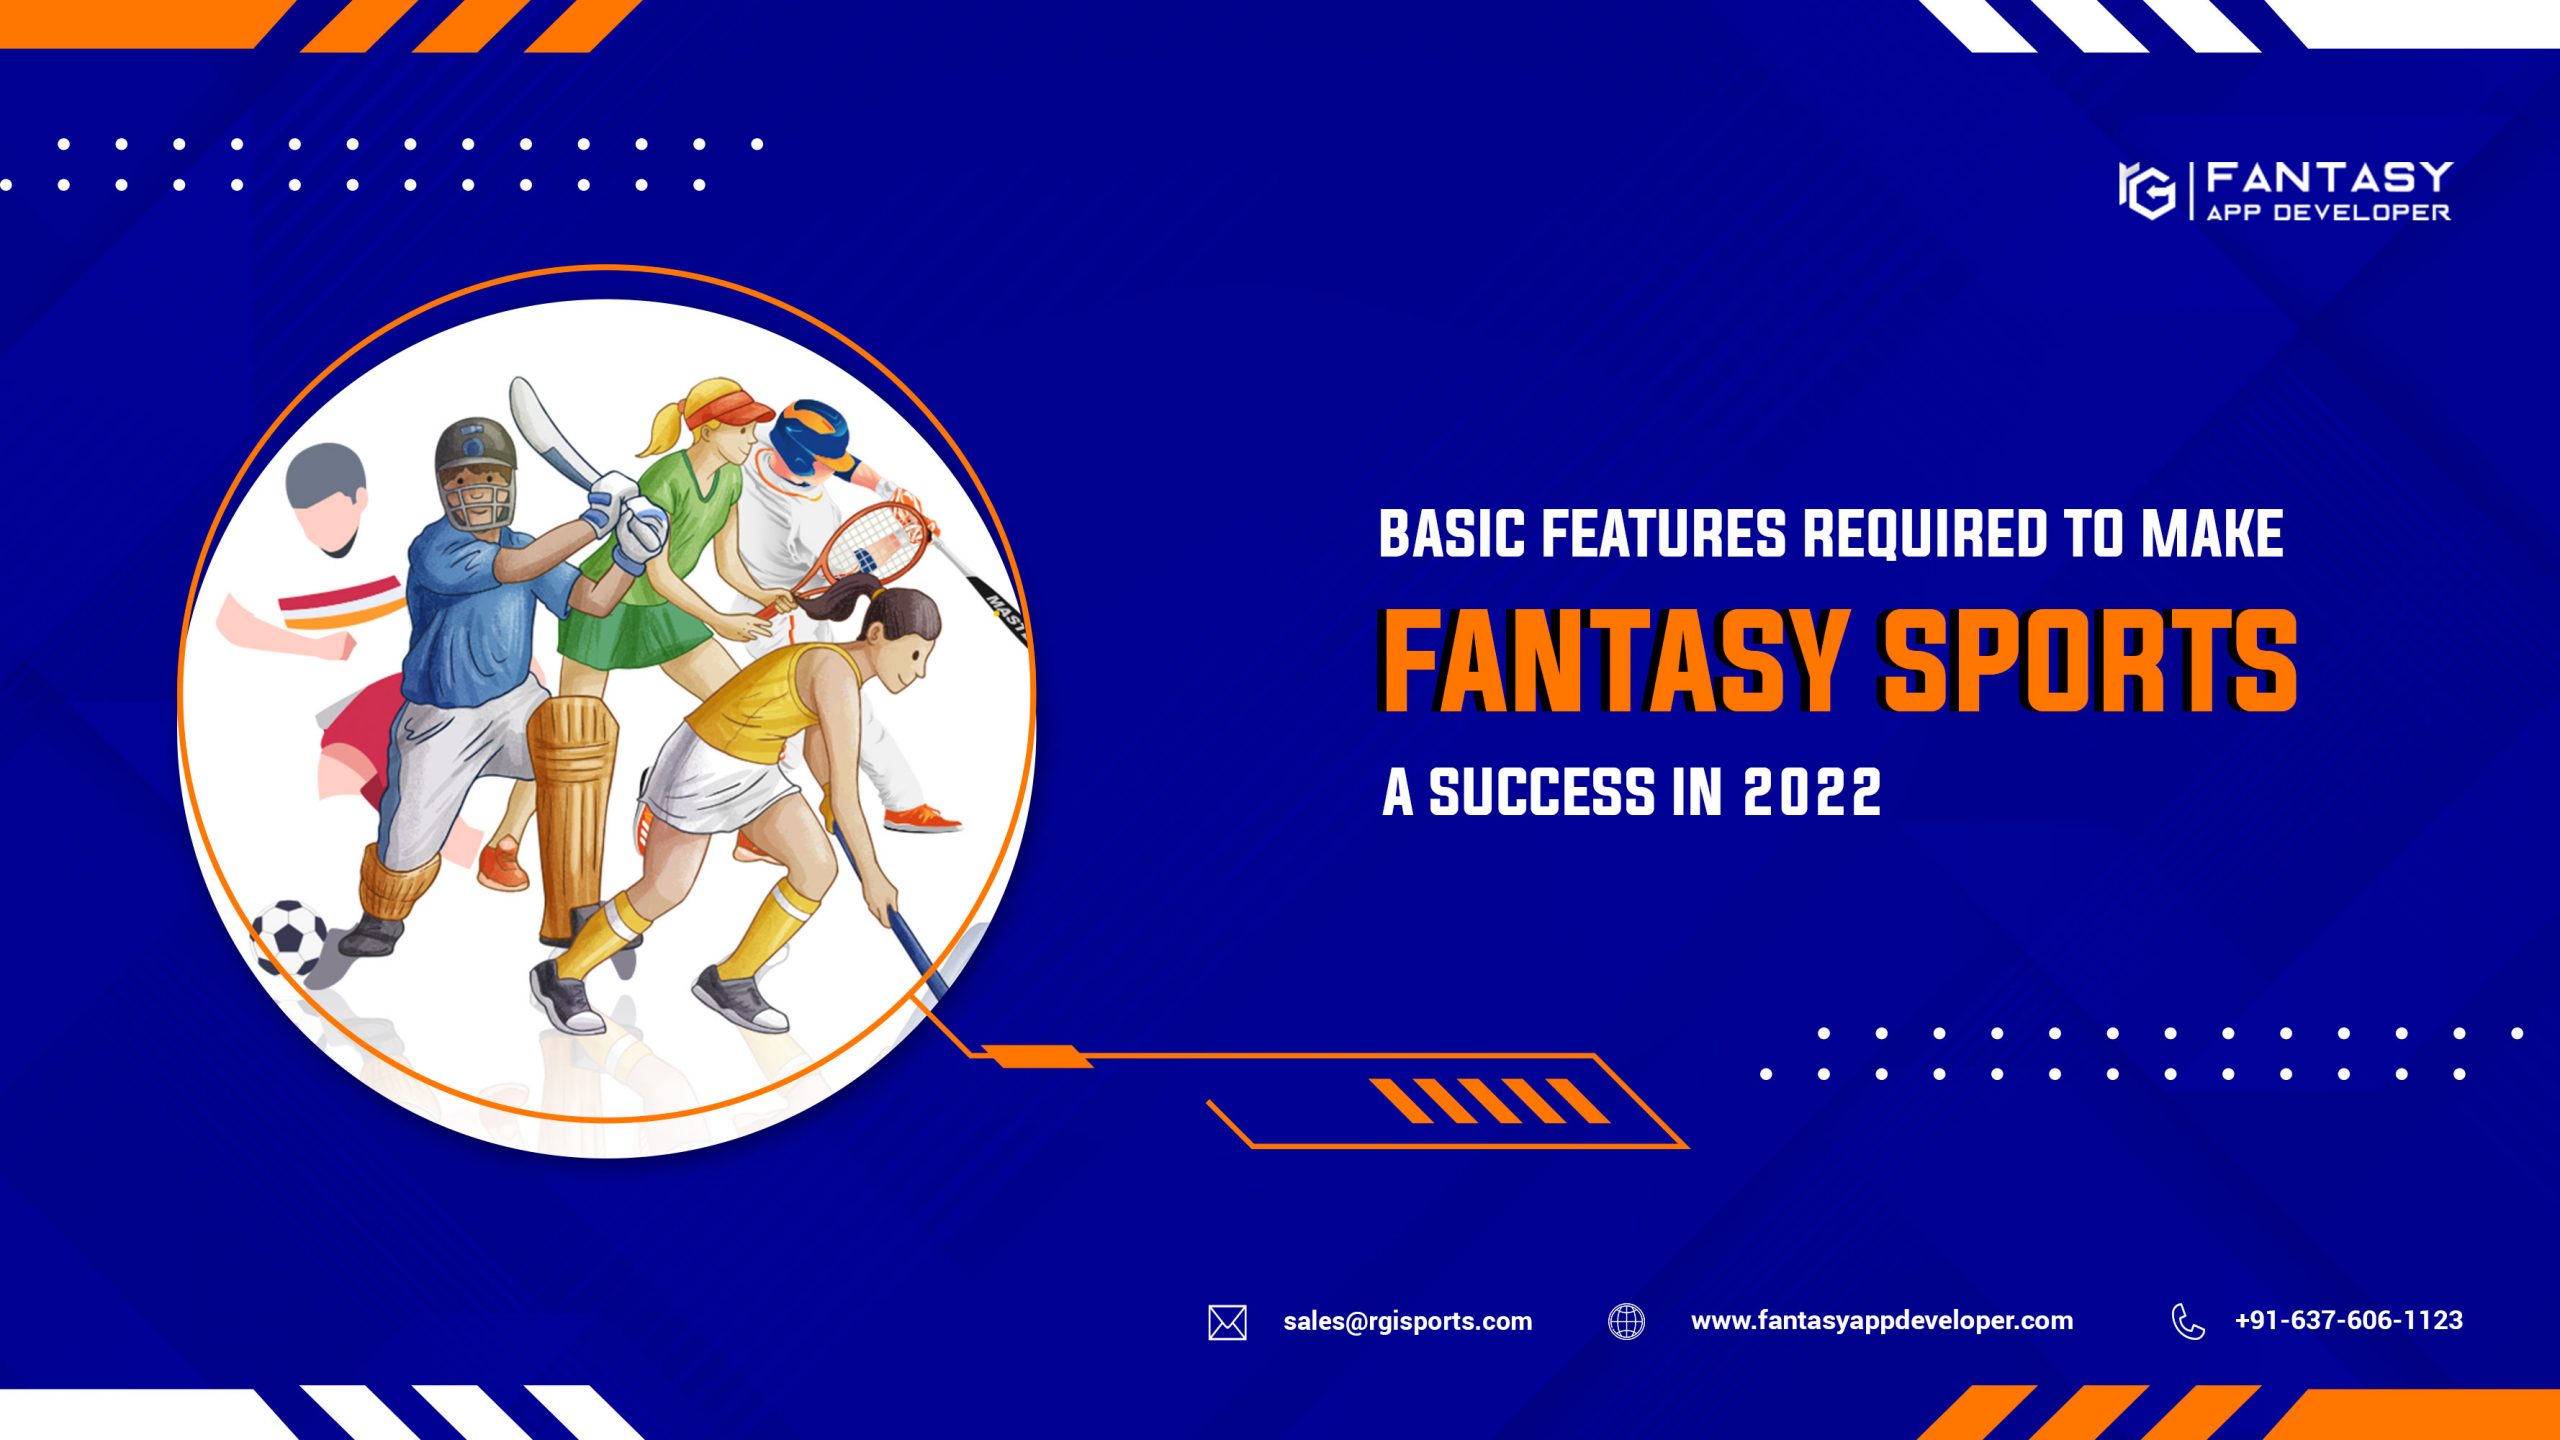 Basic-Features-required-to-make-Fantasy-Sports-a-success-in-2022